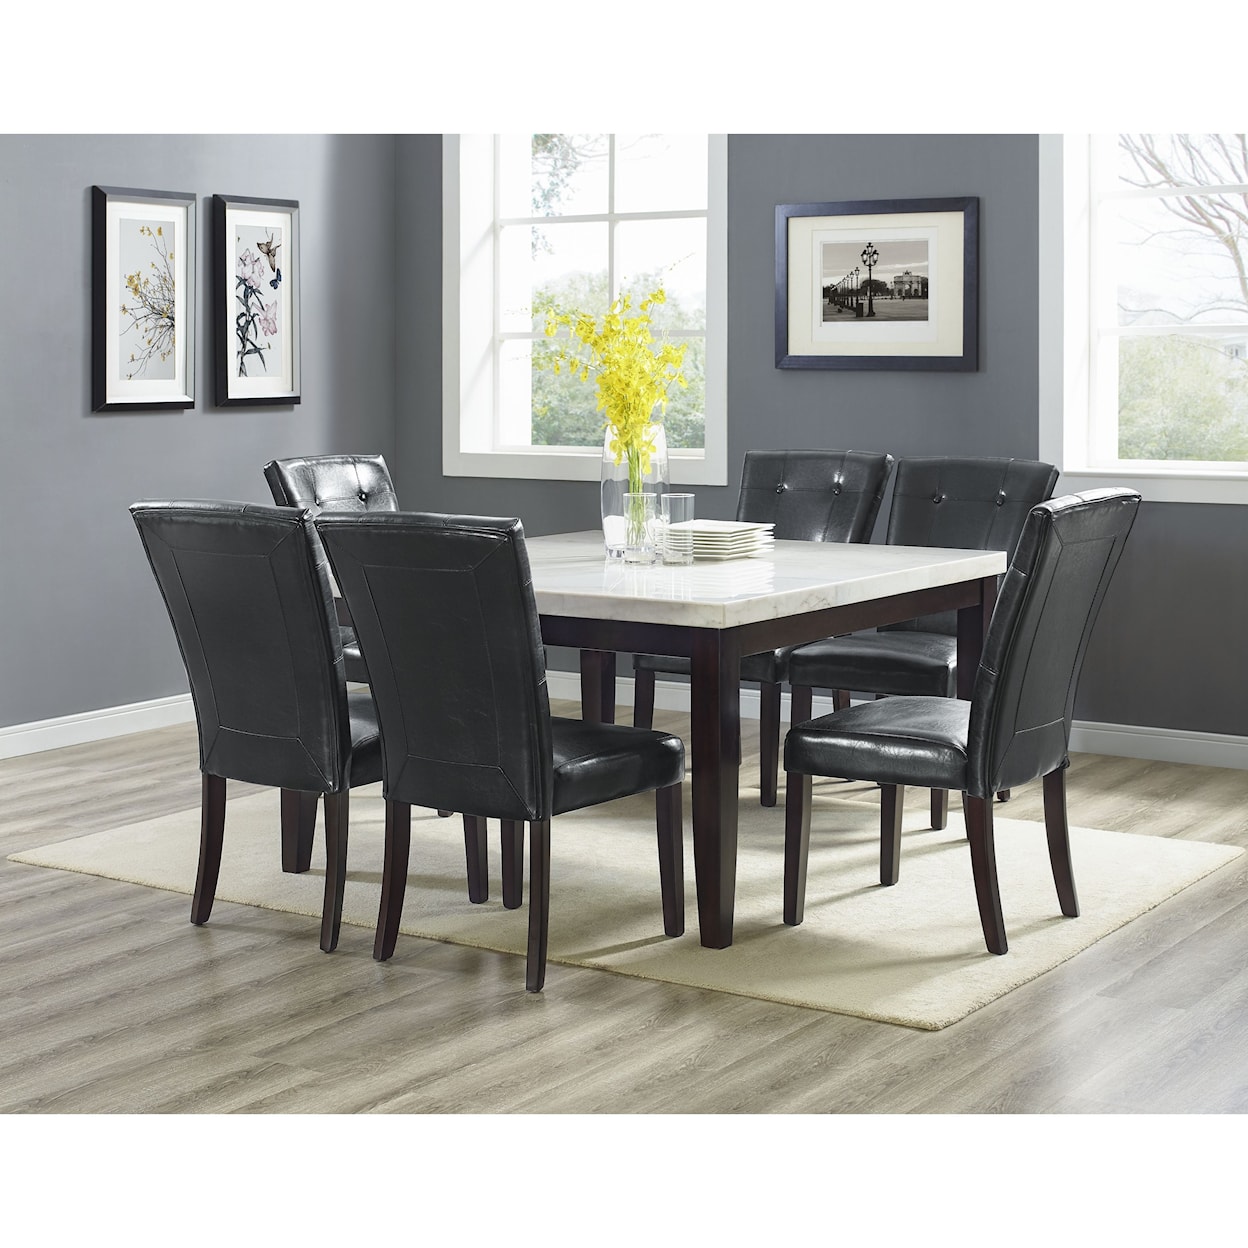 Steve Silver Francis 7 Piece Table and Chair Set